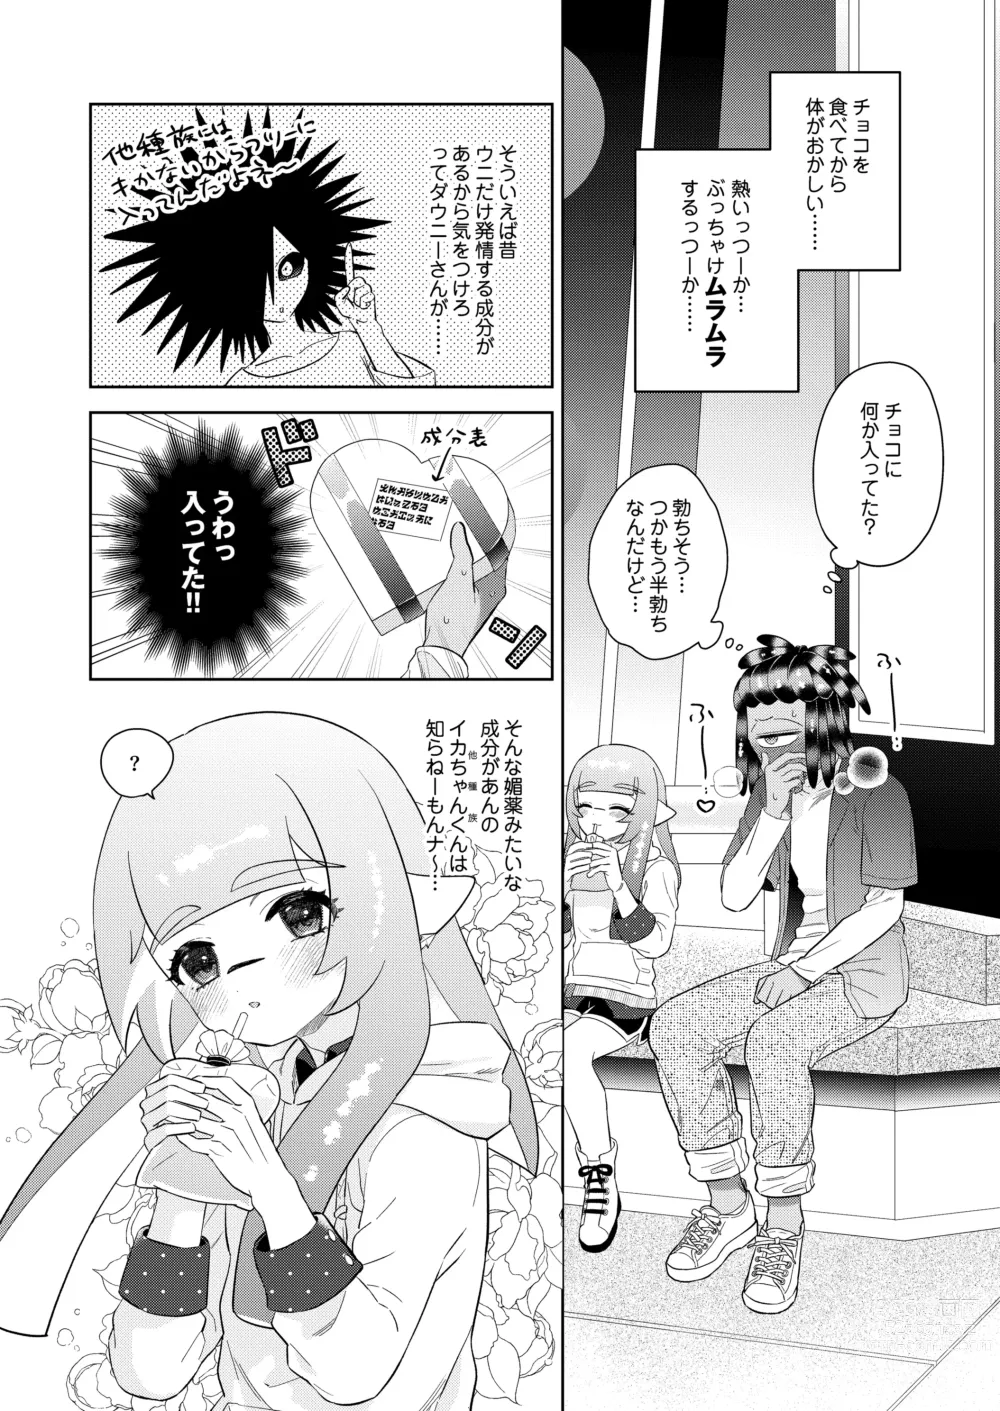 Page 5 of doujinshi Lovepotion Chocolate